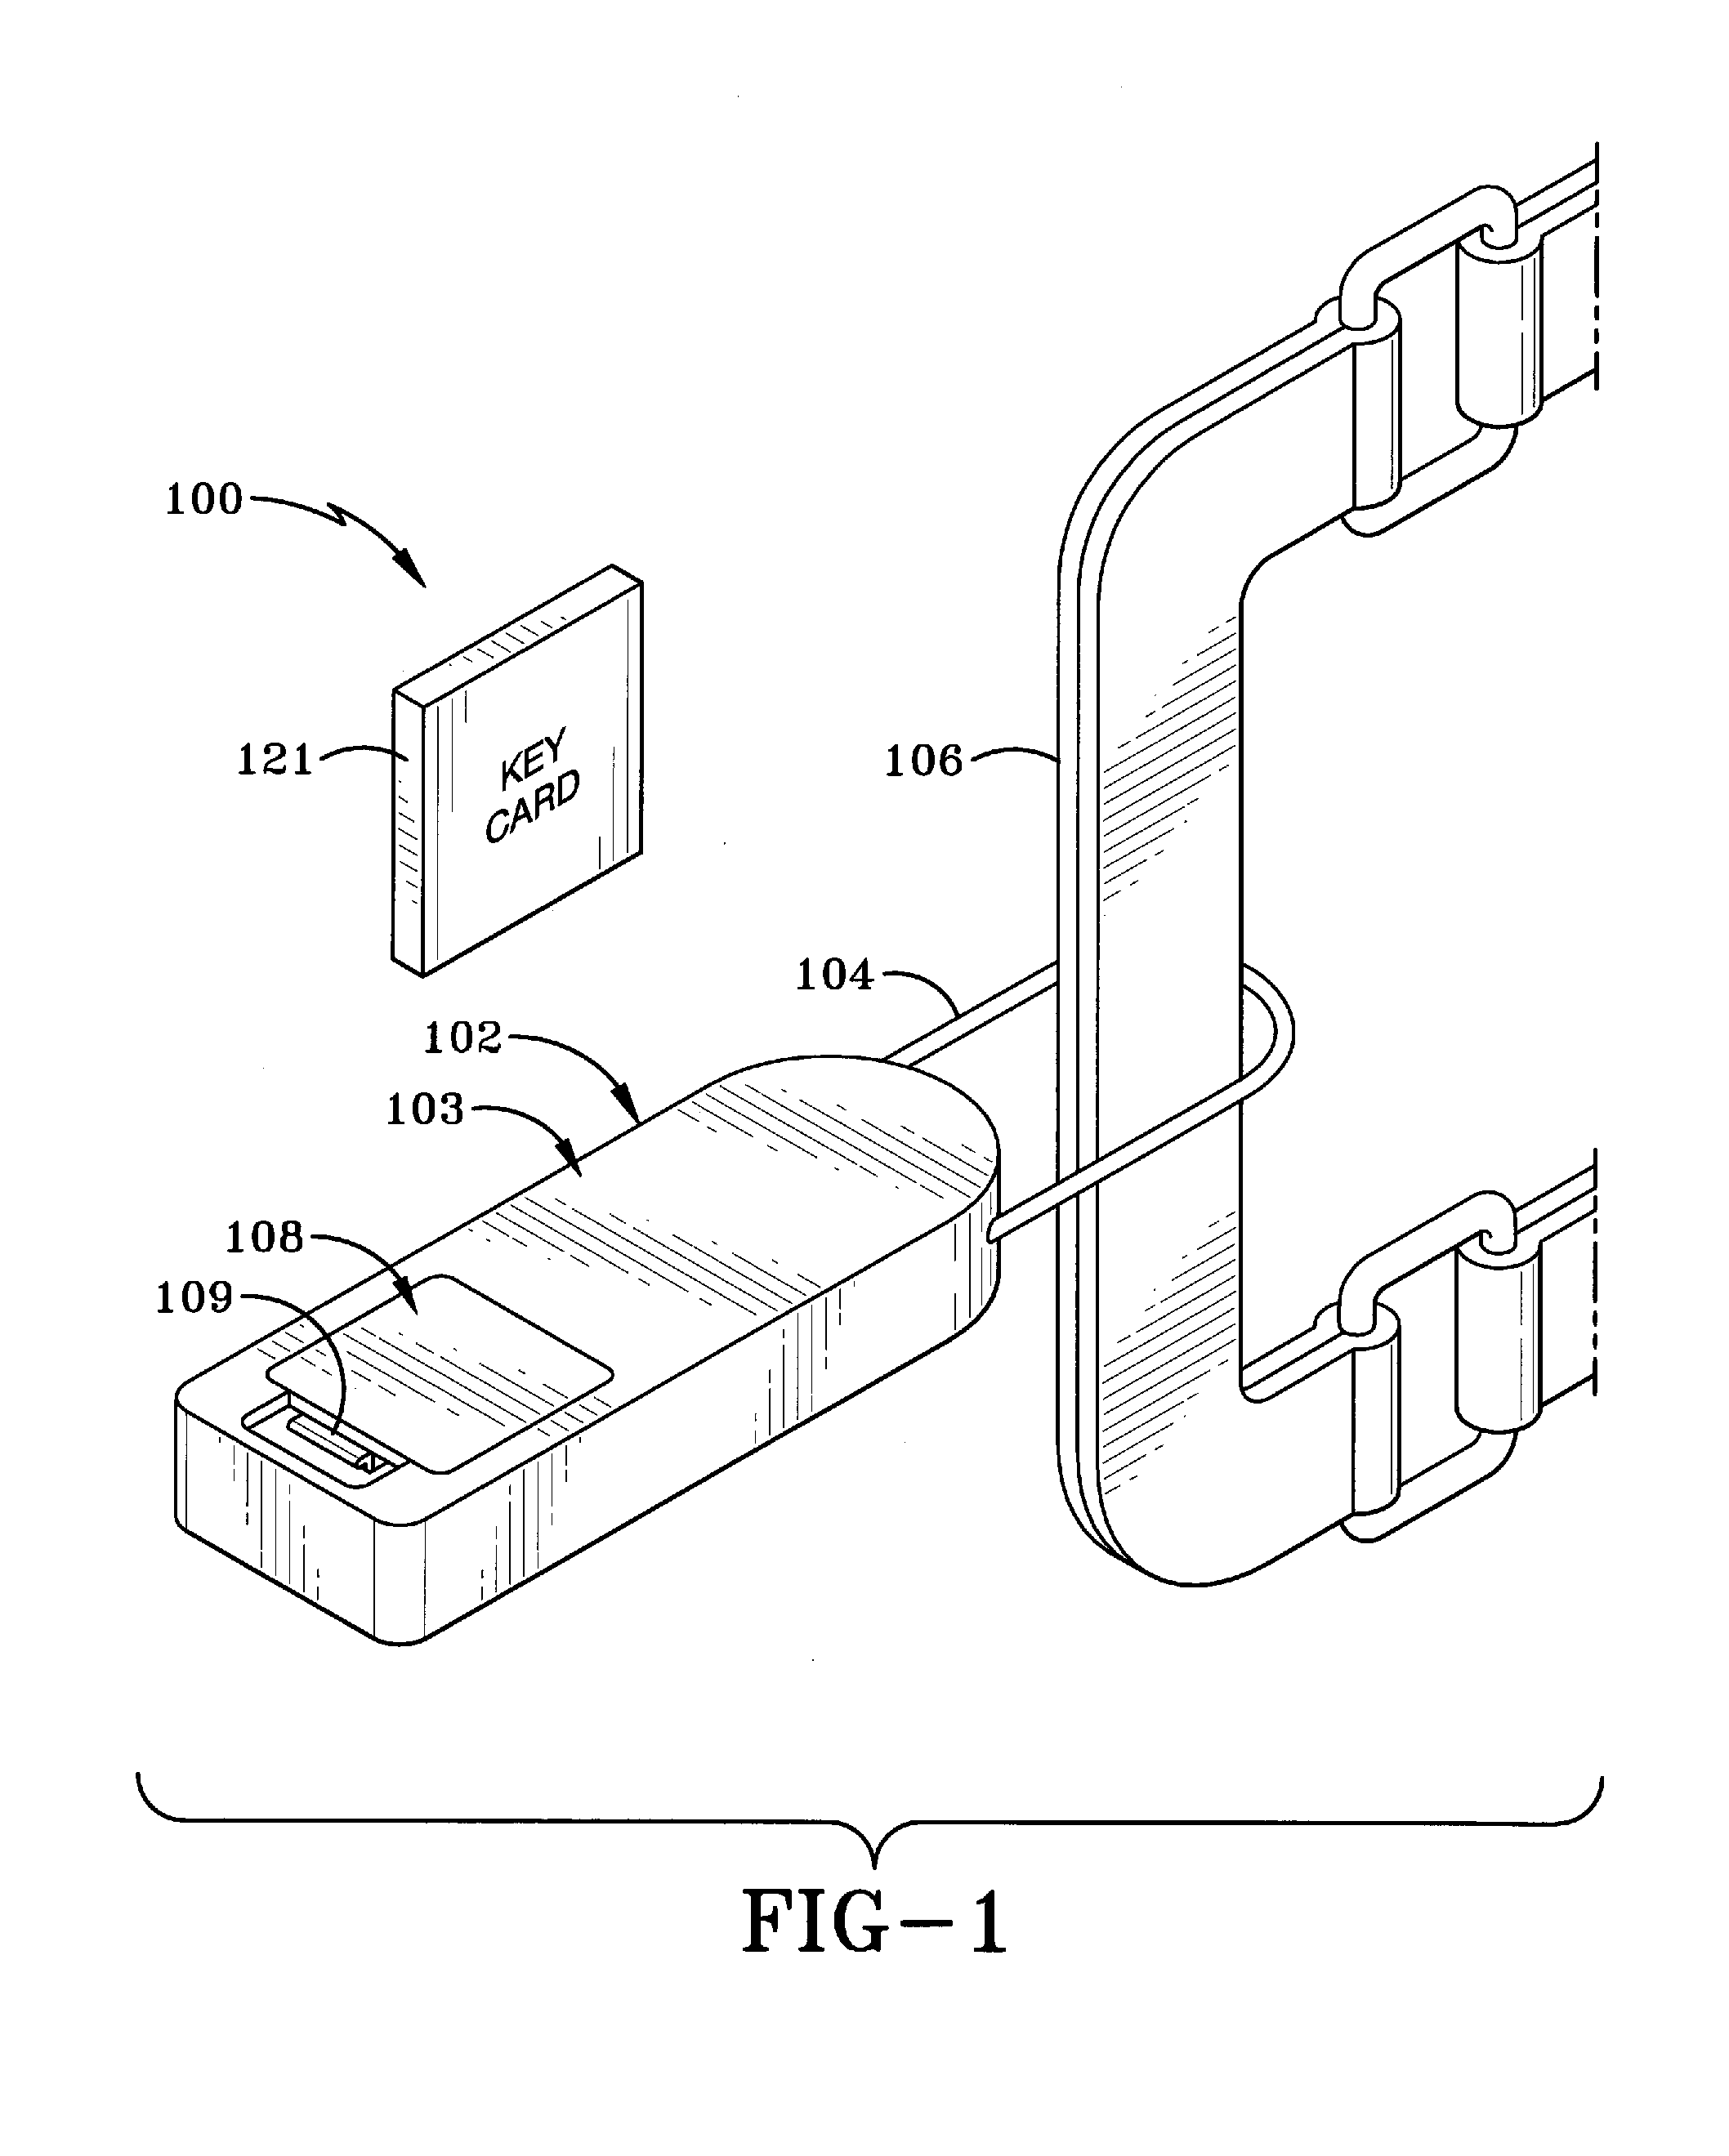 Method and apparatus for powering a security device